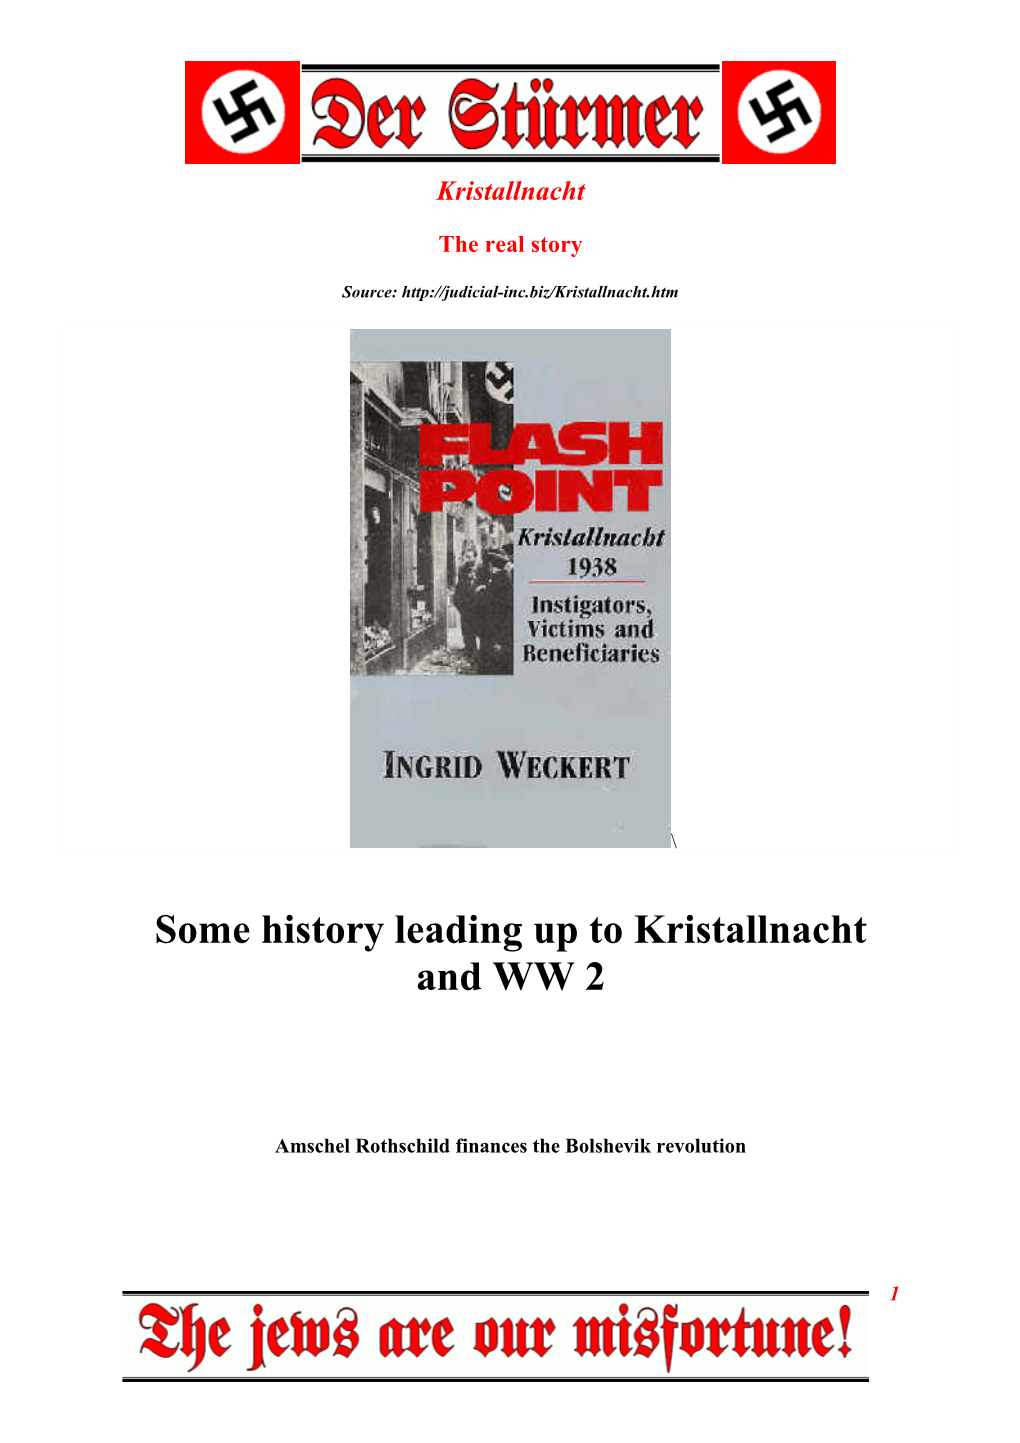 Kristallnacht-The Real Story